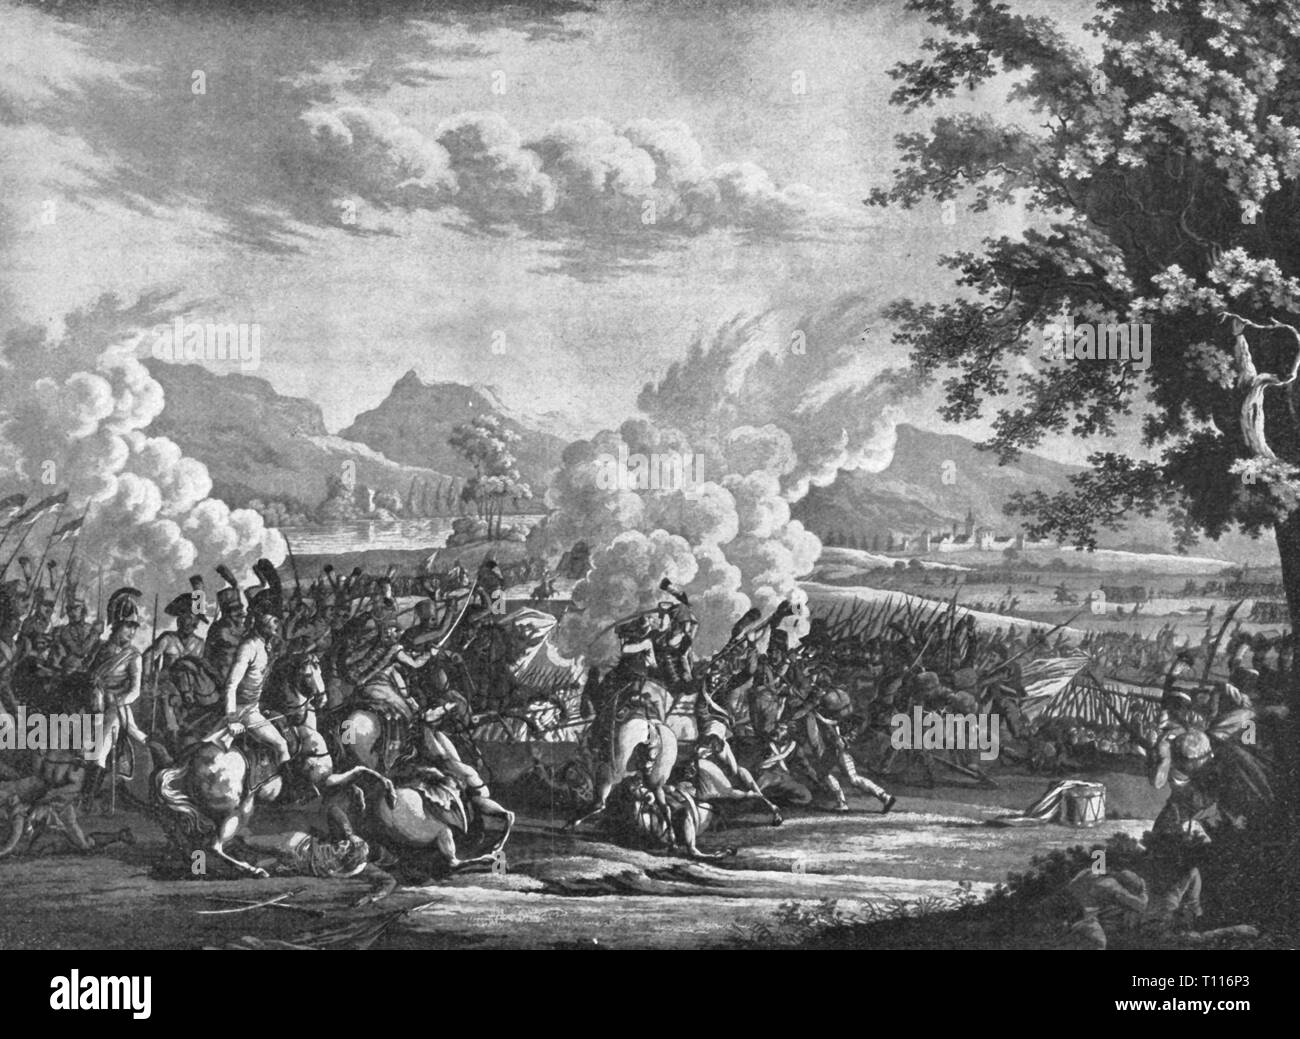 second coalition war 1798 - 1802, Battle of Magnano, 5.4.1799, print based on copper engraving by Johann Lorenz Rugendas, 1st half 19th century, Battle of Verona, French Revolutionary Wars, Napoleonic Wars, war, wars, French, Austrian, French army, Imperial army, Italy, Piedmont, Republic of France, Austria, Holy Roman Empire, HRE, people, 18th century, second, 2nd, print, printings, historic, historical, Additional-Rights-Clearance-Info-Not-Available Stock Photo